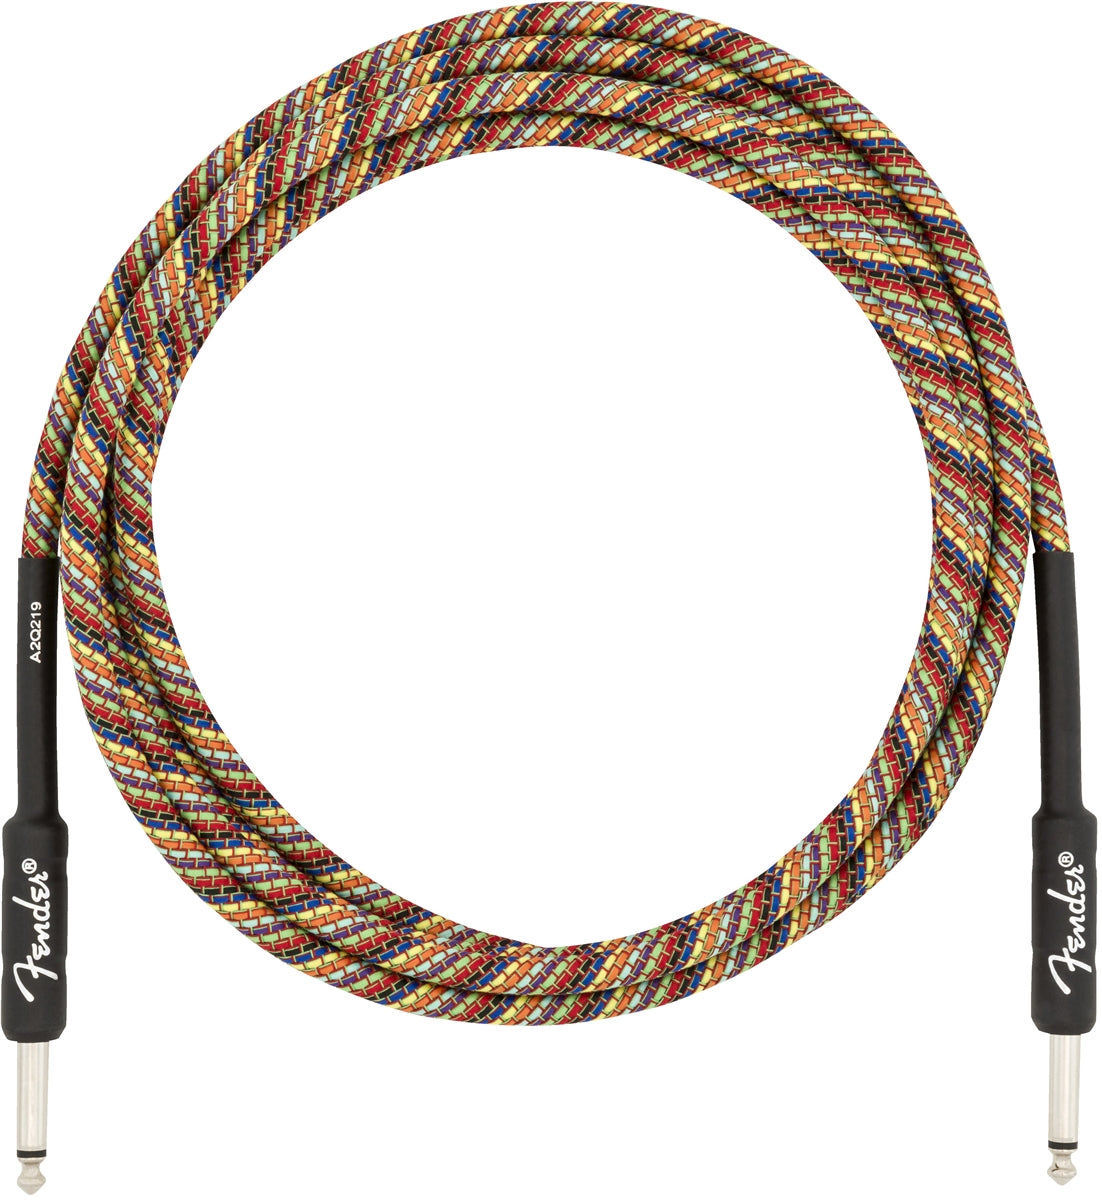 Fender Festival 10' Ts Male 1/4 - Ts Male 1/4 Instrument Cable - Rainbow